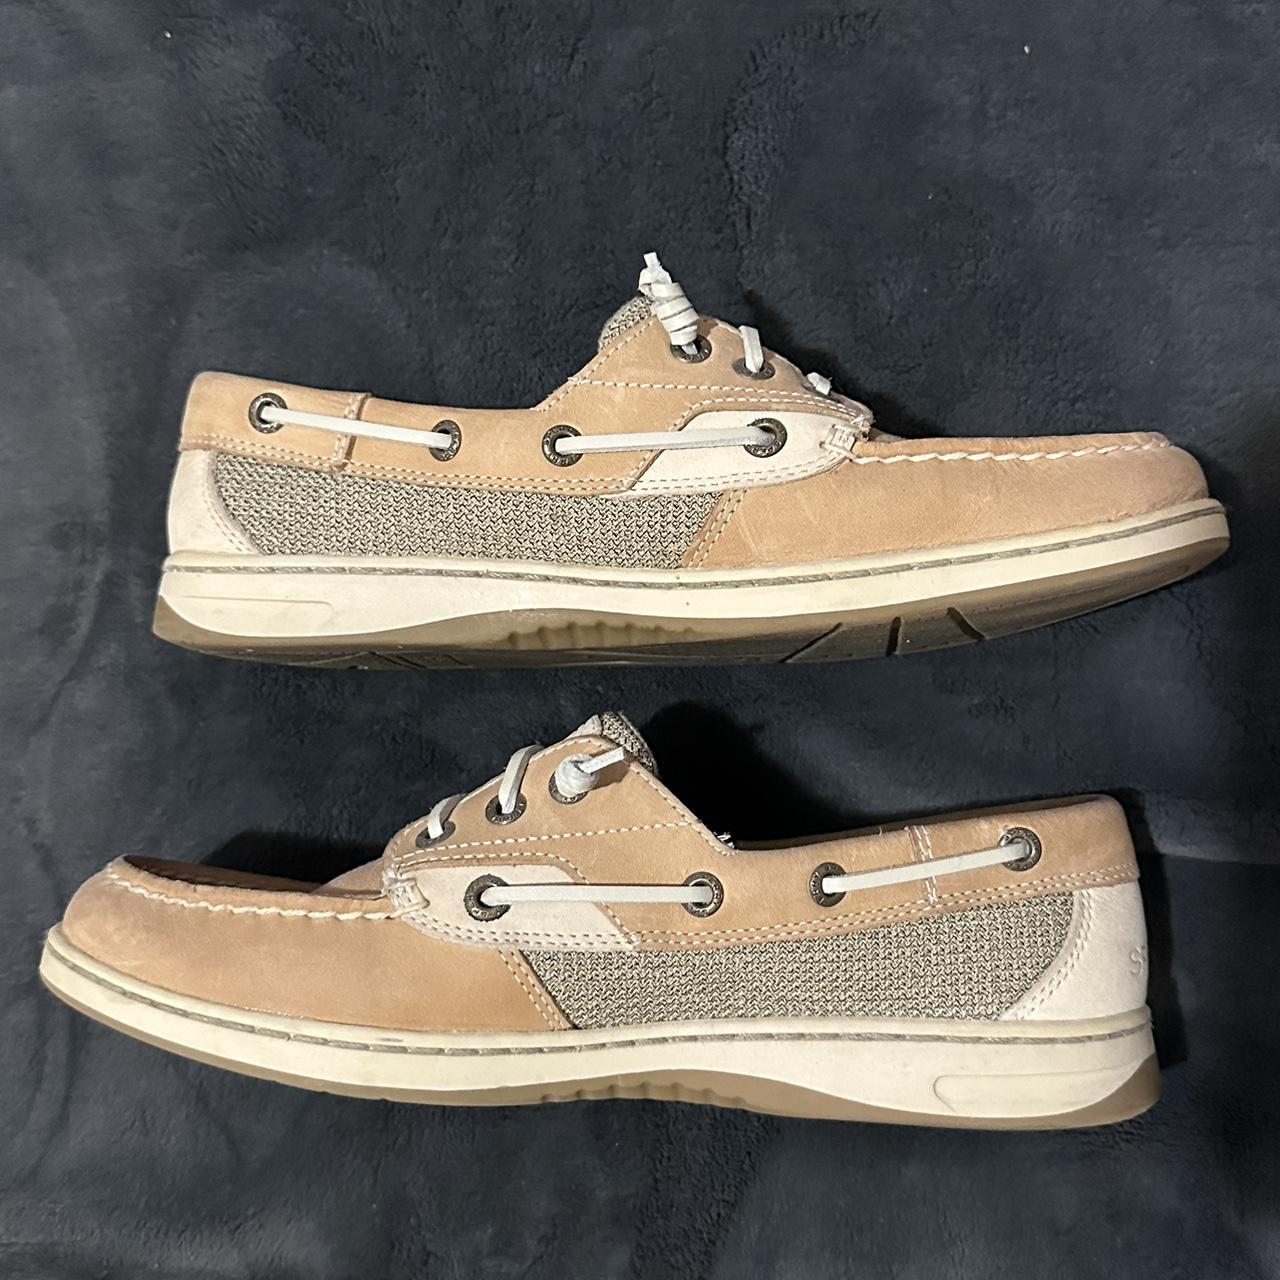 Sperry Women's Tan and Cream Boat-shoes (3)